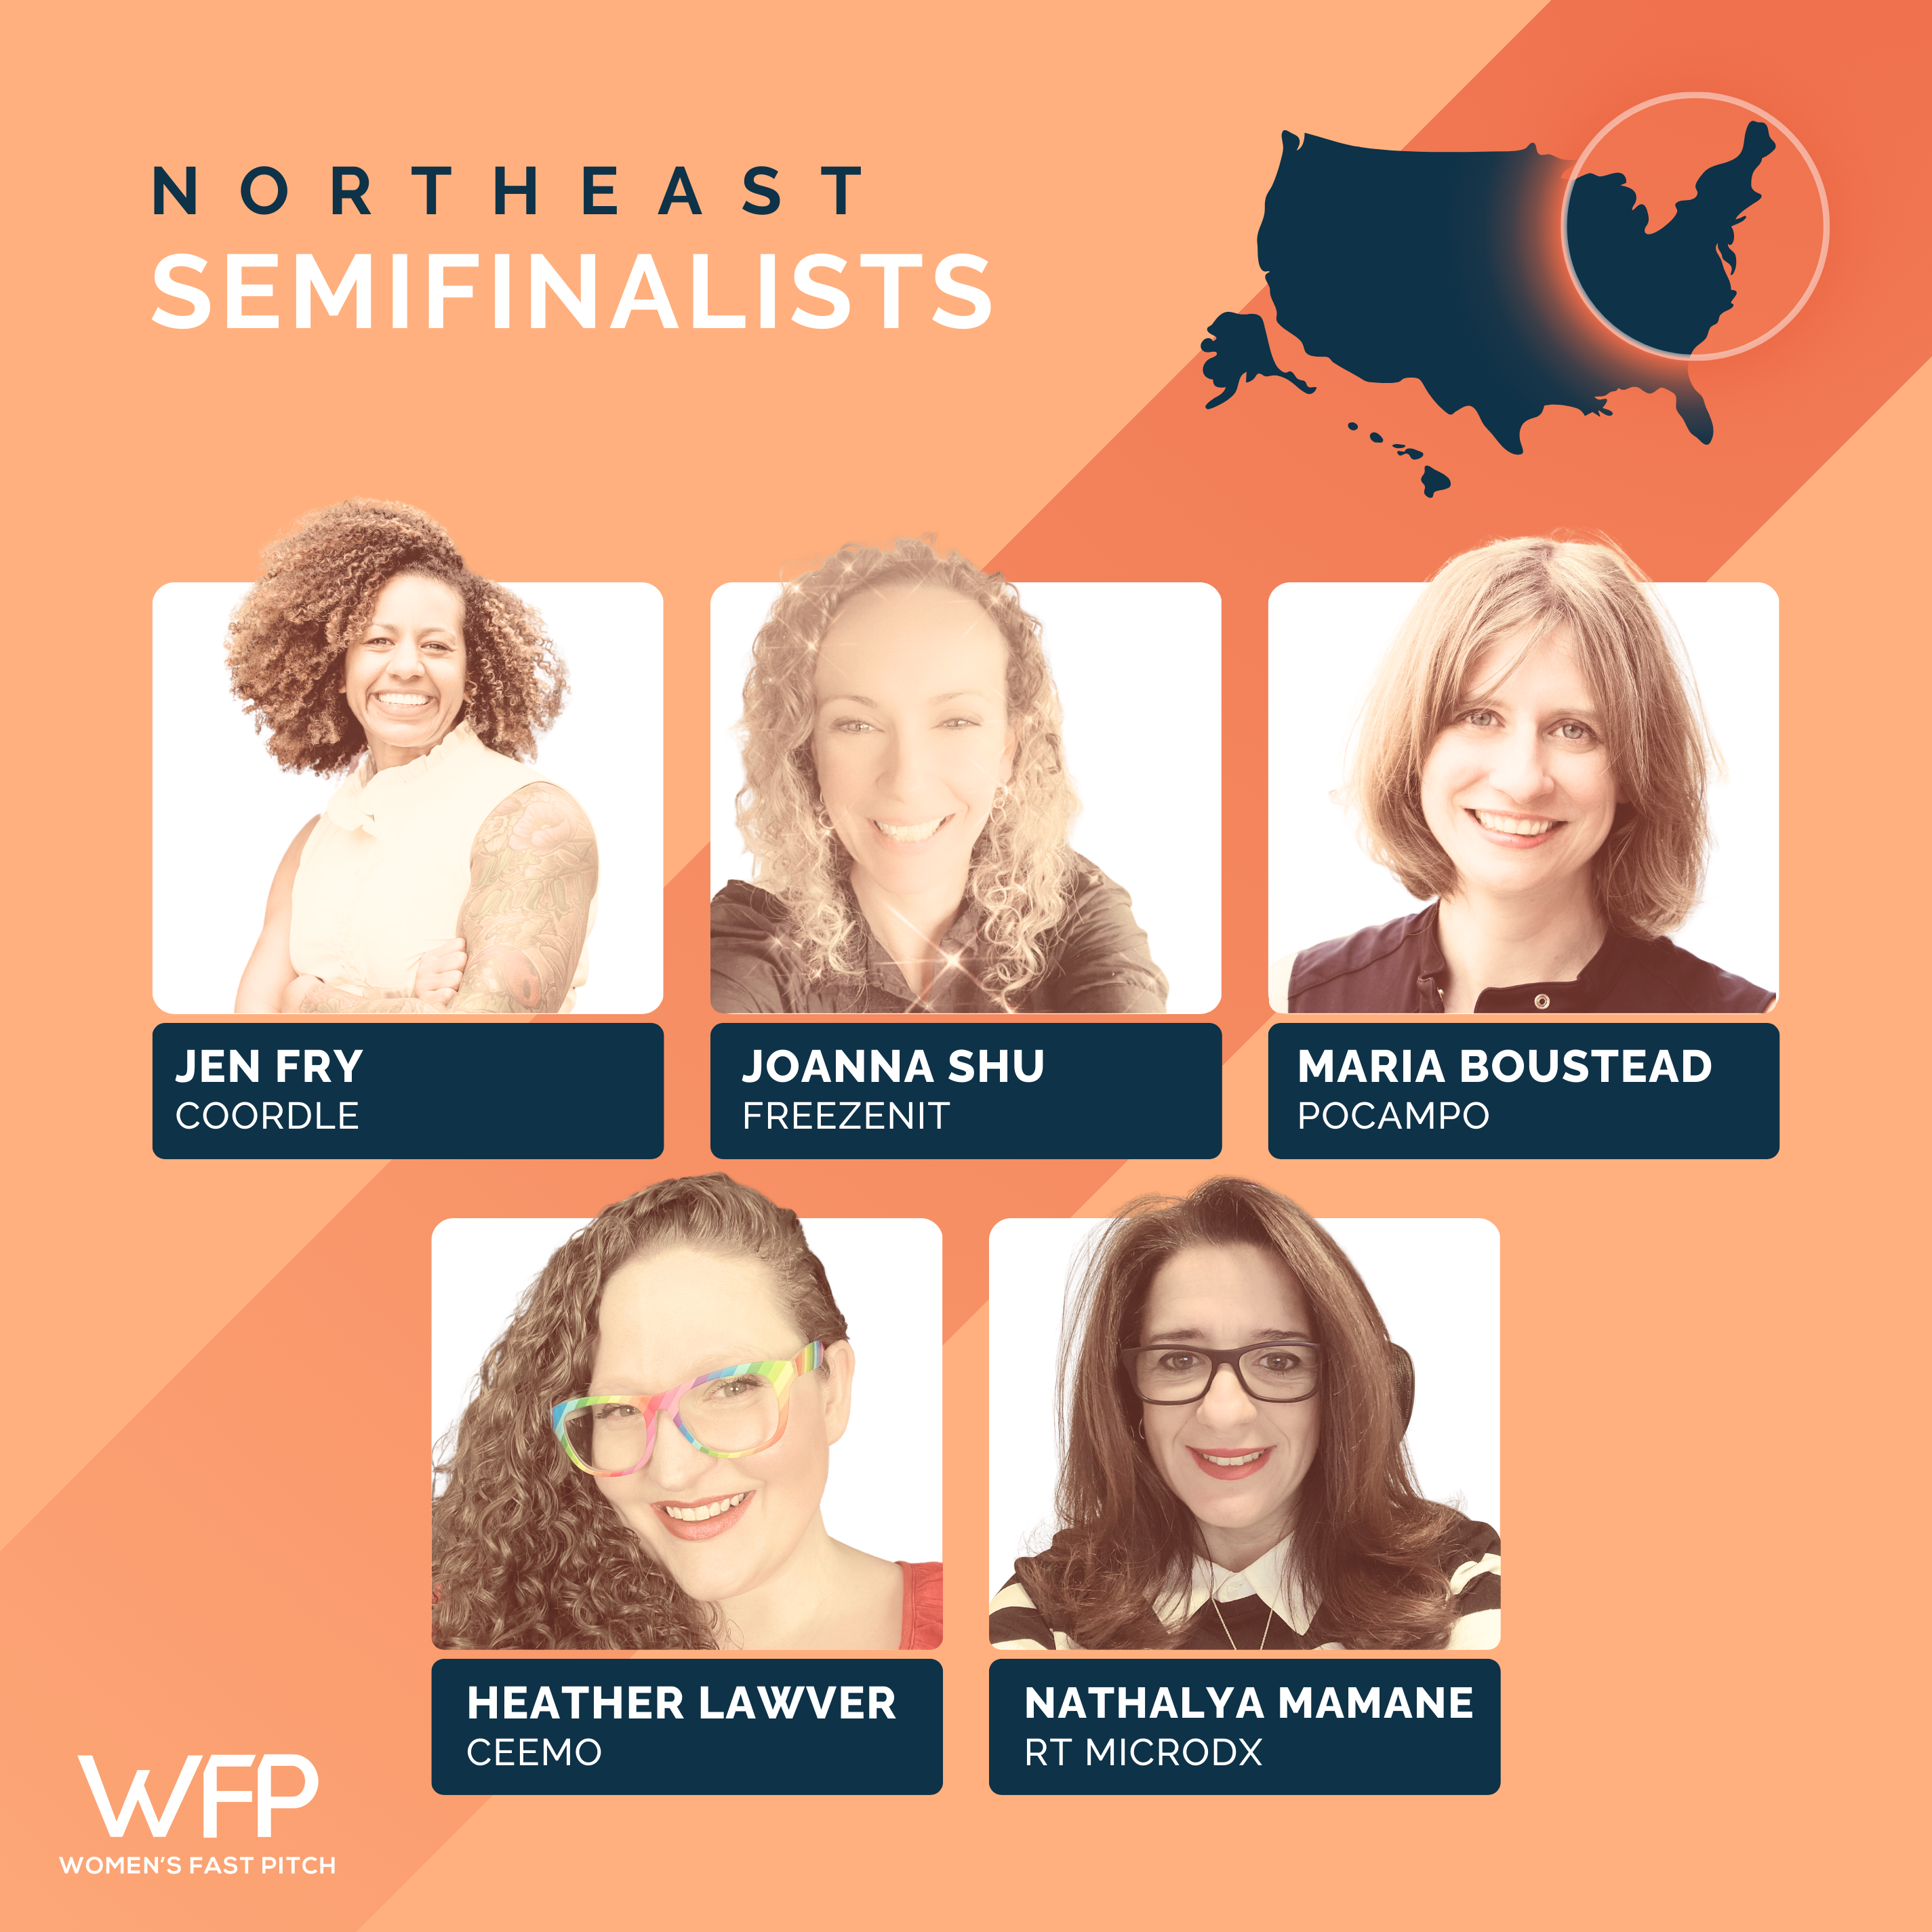 A promotional image showing the five regional northeast semifinalists for the Stella Women's Fast Pitch Competition! From left to right, top to bottom, the semifinalists are Dr. Jen Fry, Joanna Shu, Maria Boustead, Heather Lawver, and Nathalya Mamane!